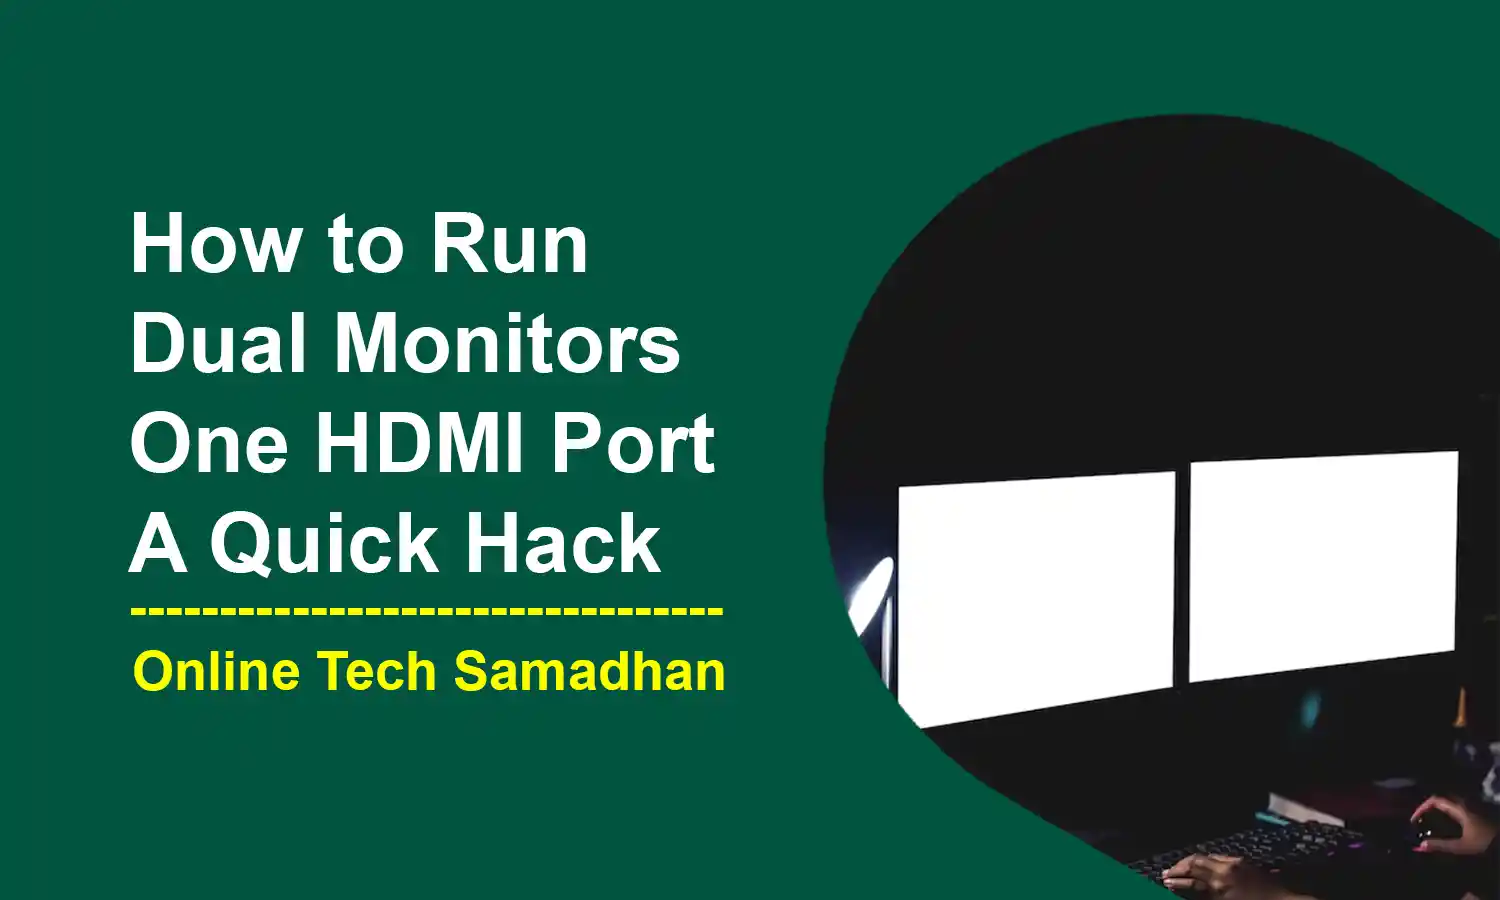 How to Run Dual Monitors with One HDMI Port